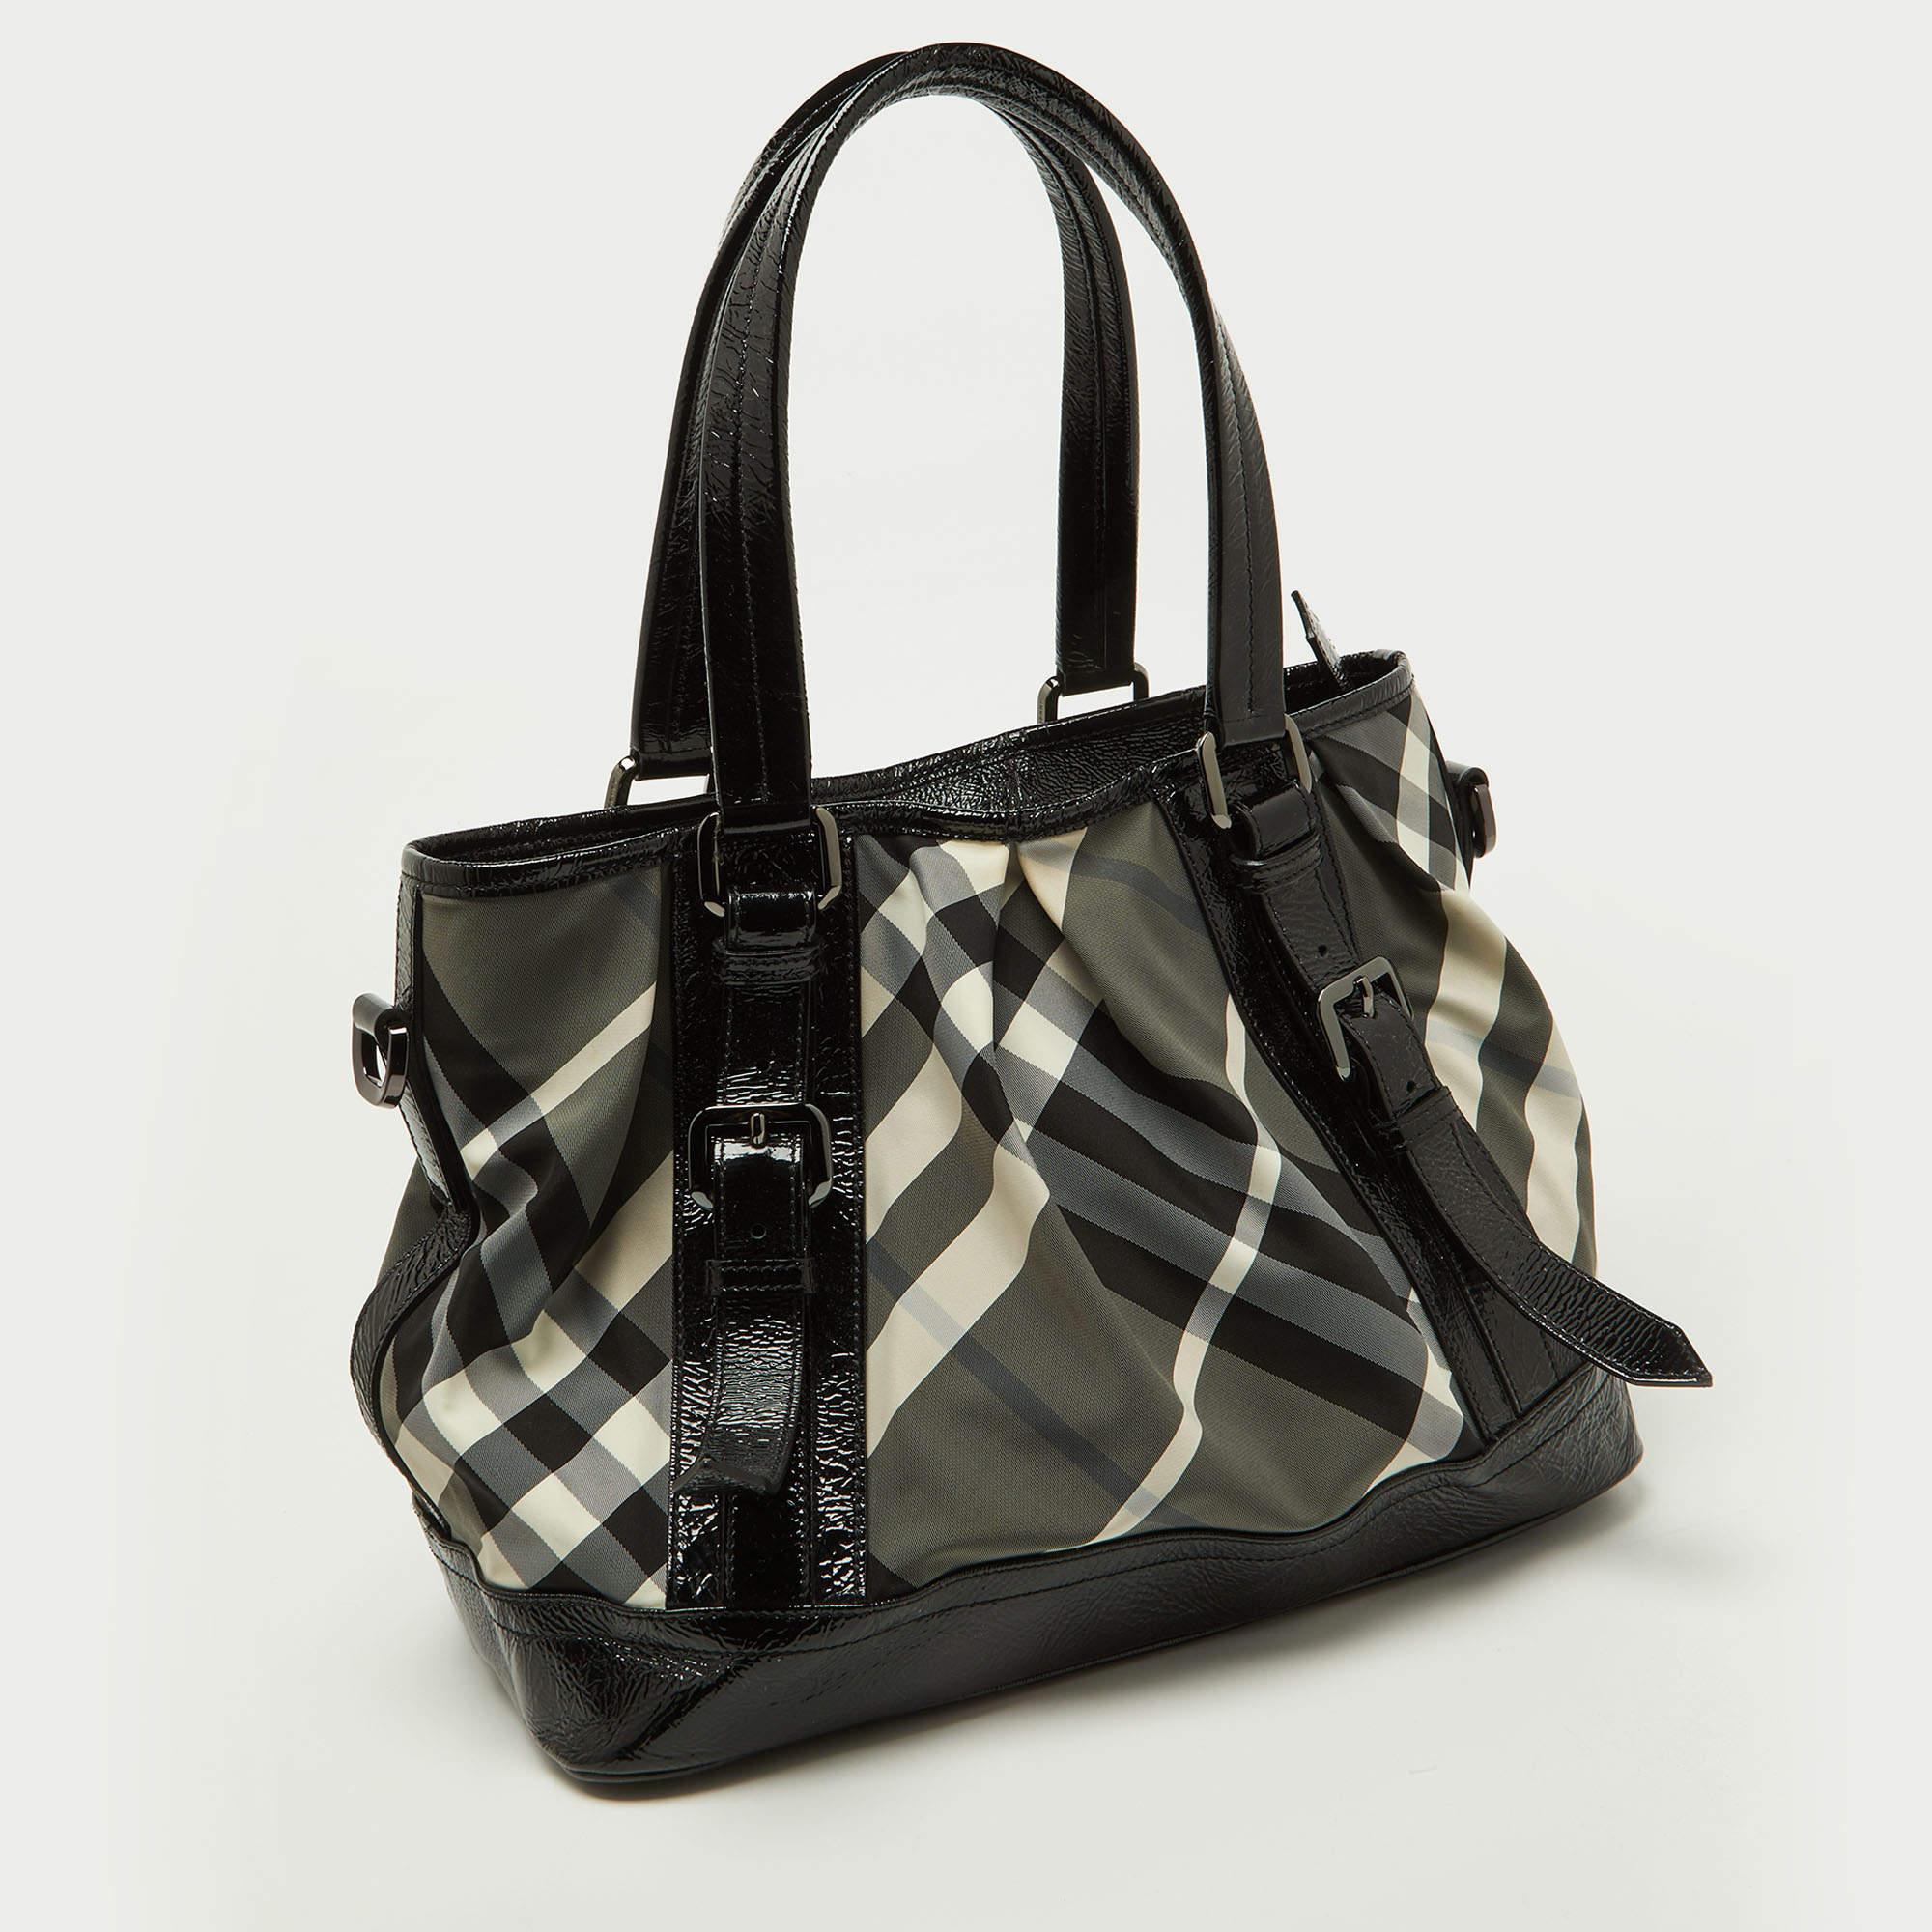 Simply gorgeous and built to endure through all your busy days, this Burberry tote is a worthy investment. It has been crafted from patent leather and nylon in their Beat check and equipped with two handles and a spacious interior. The bag is